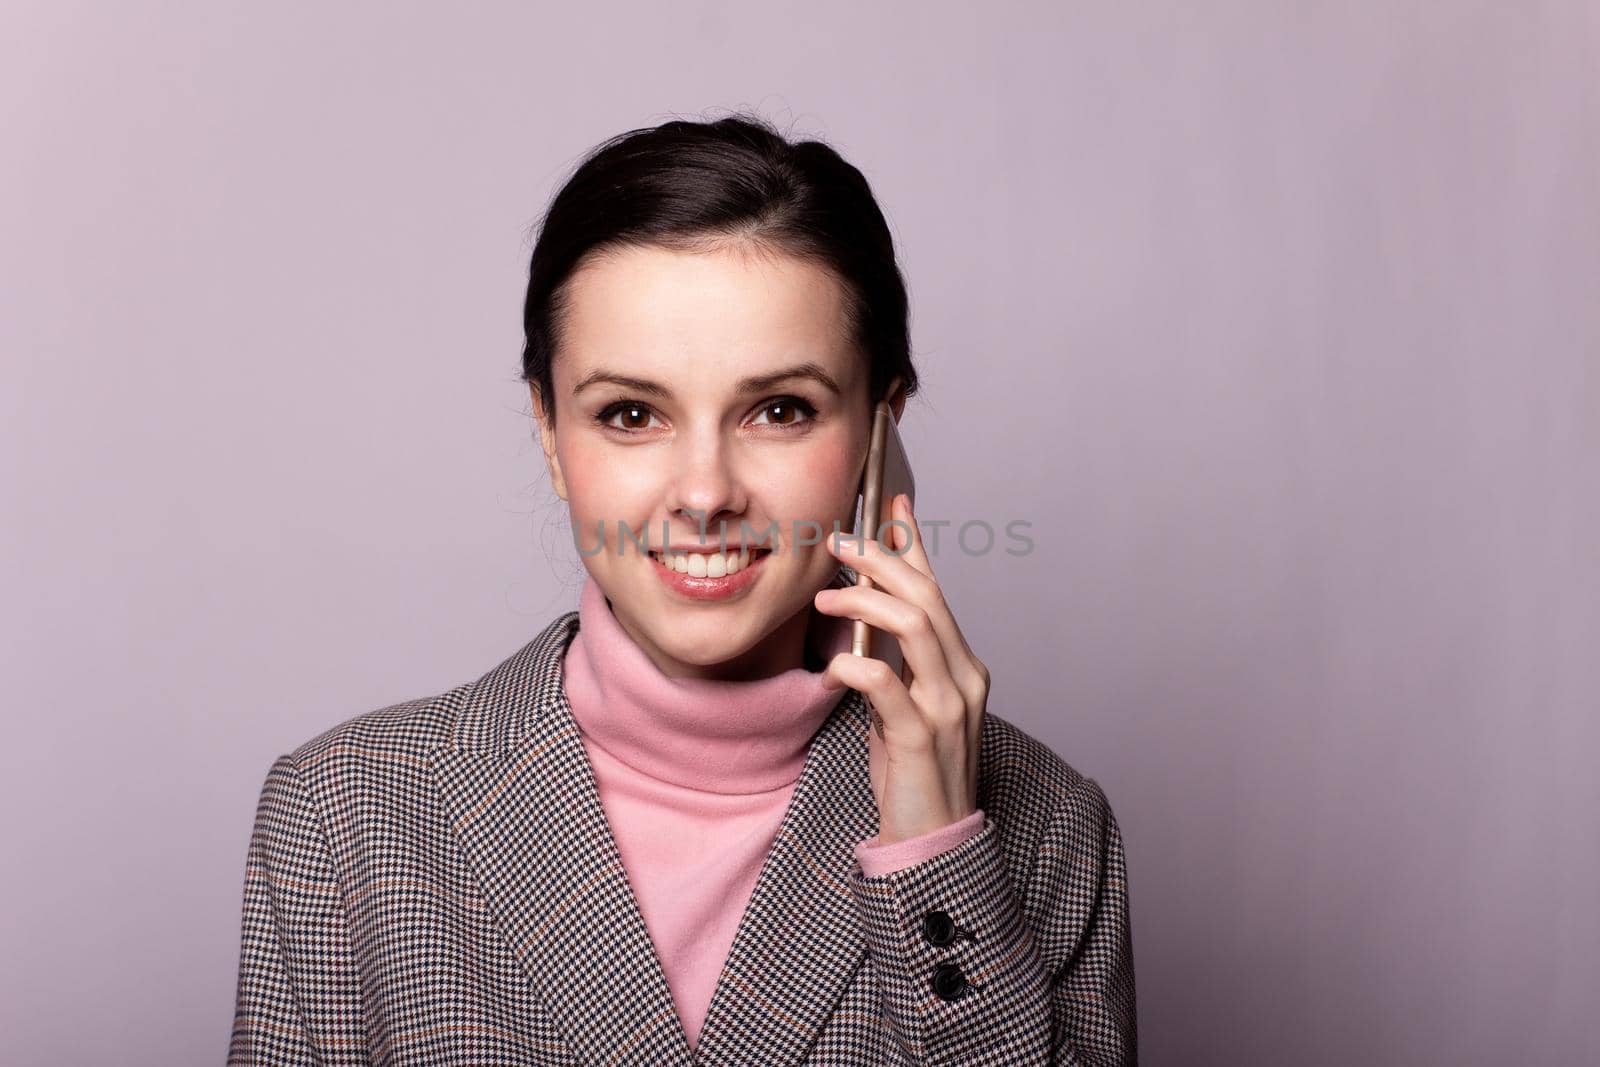 woman in a pink turtleneck, gray jacket, for sight communicates on the phone on a gray background by shilovskaya